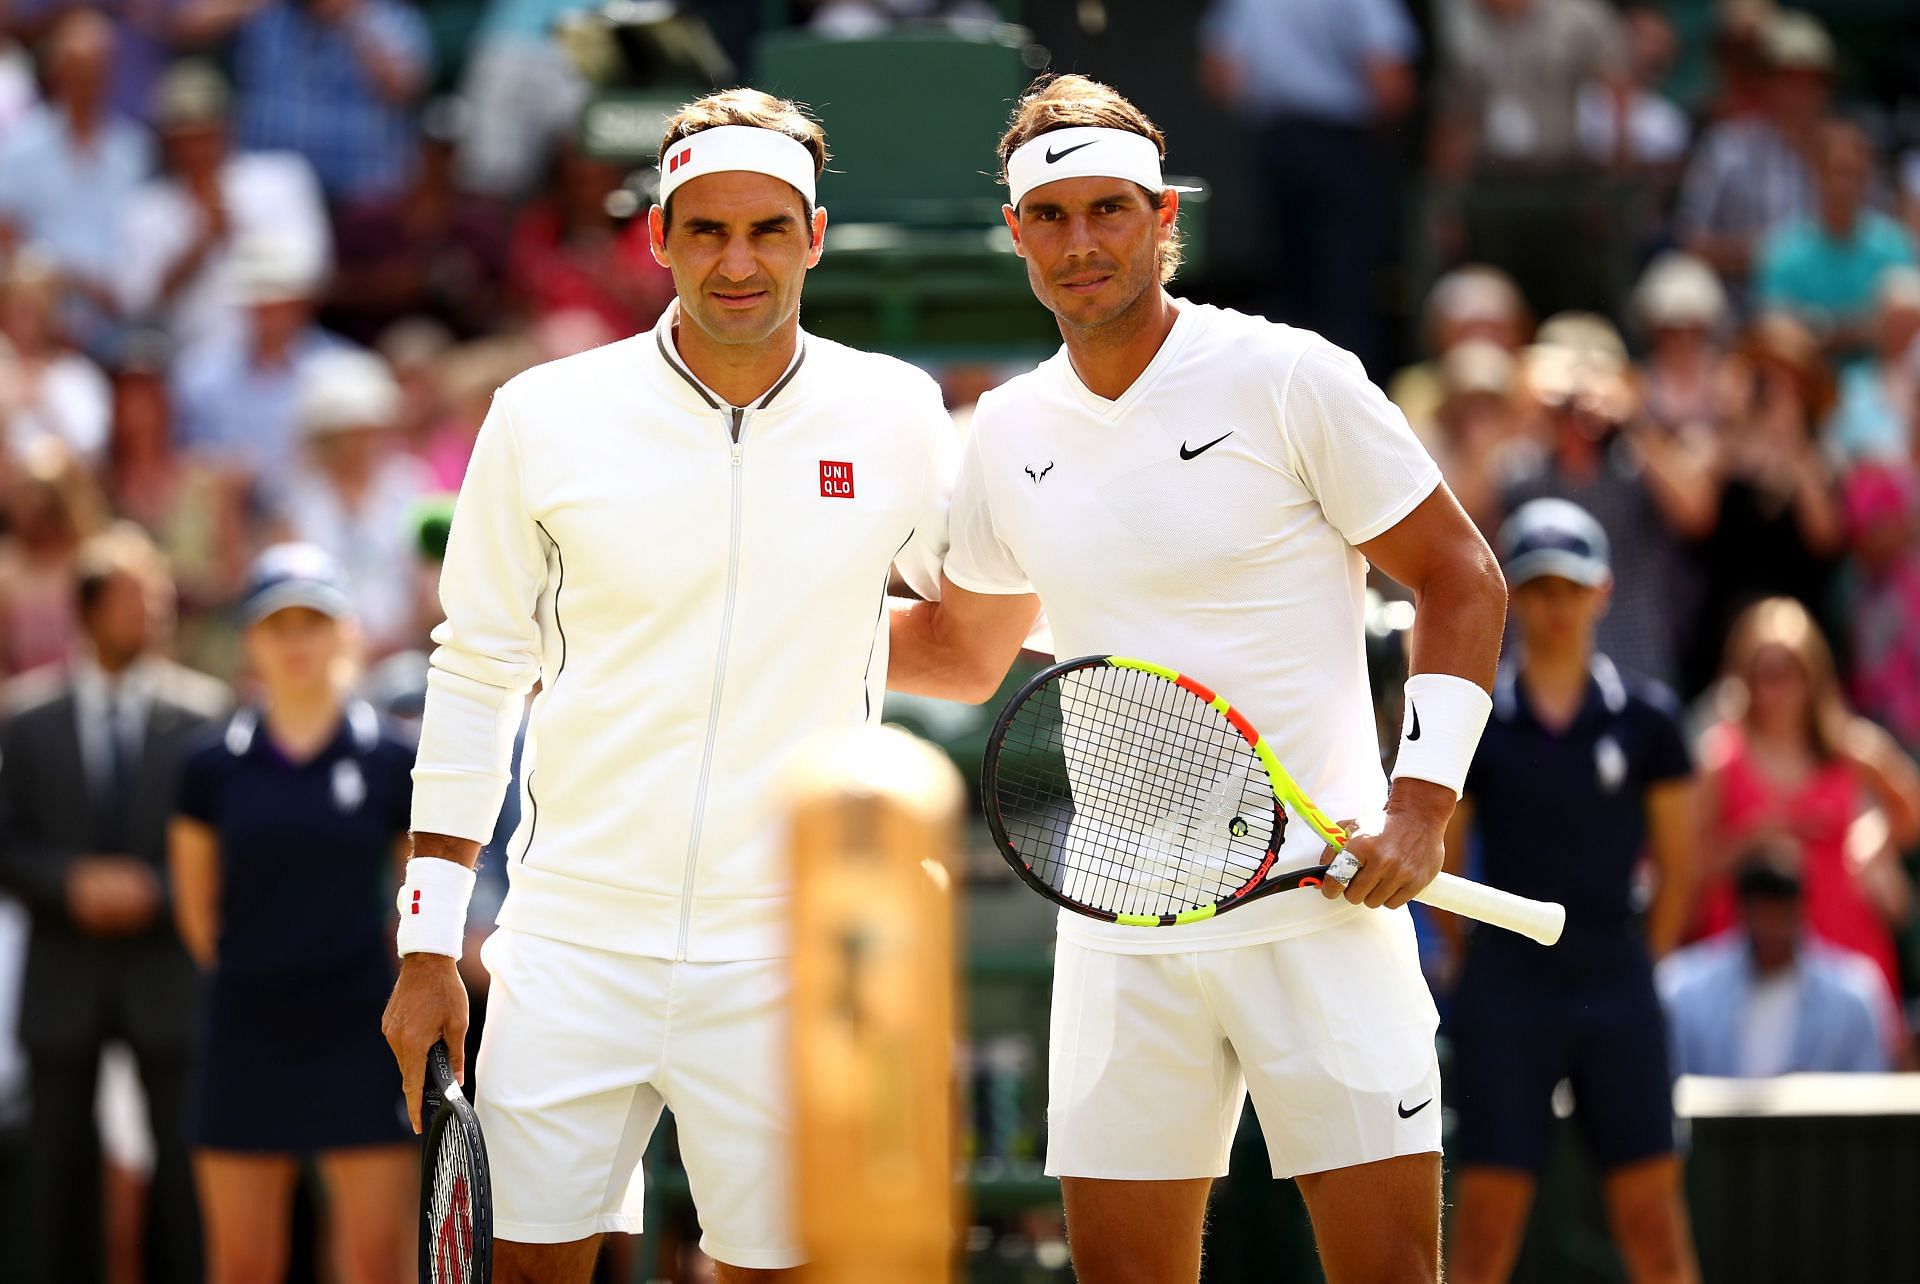 Rafael Nadal and Roger Federer pose before their match in 2019